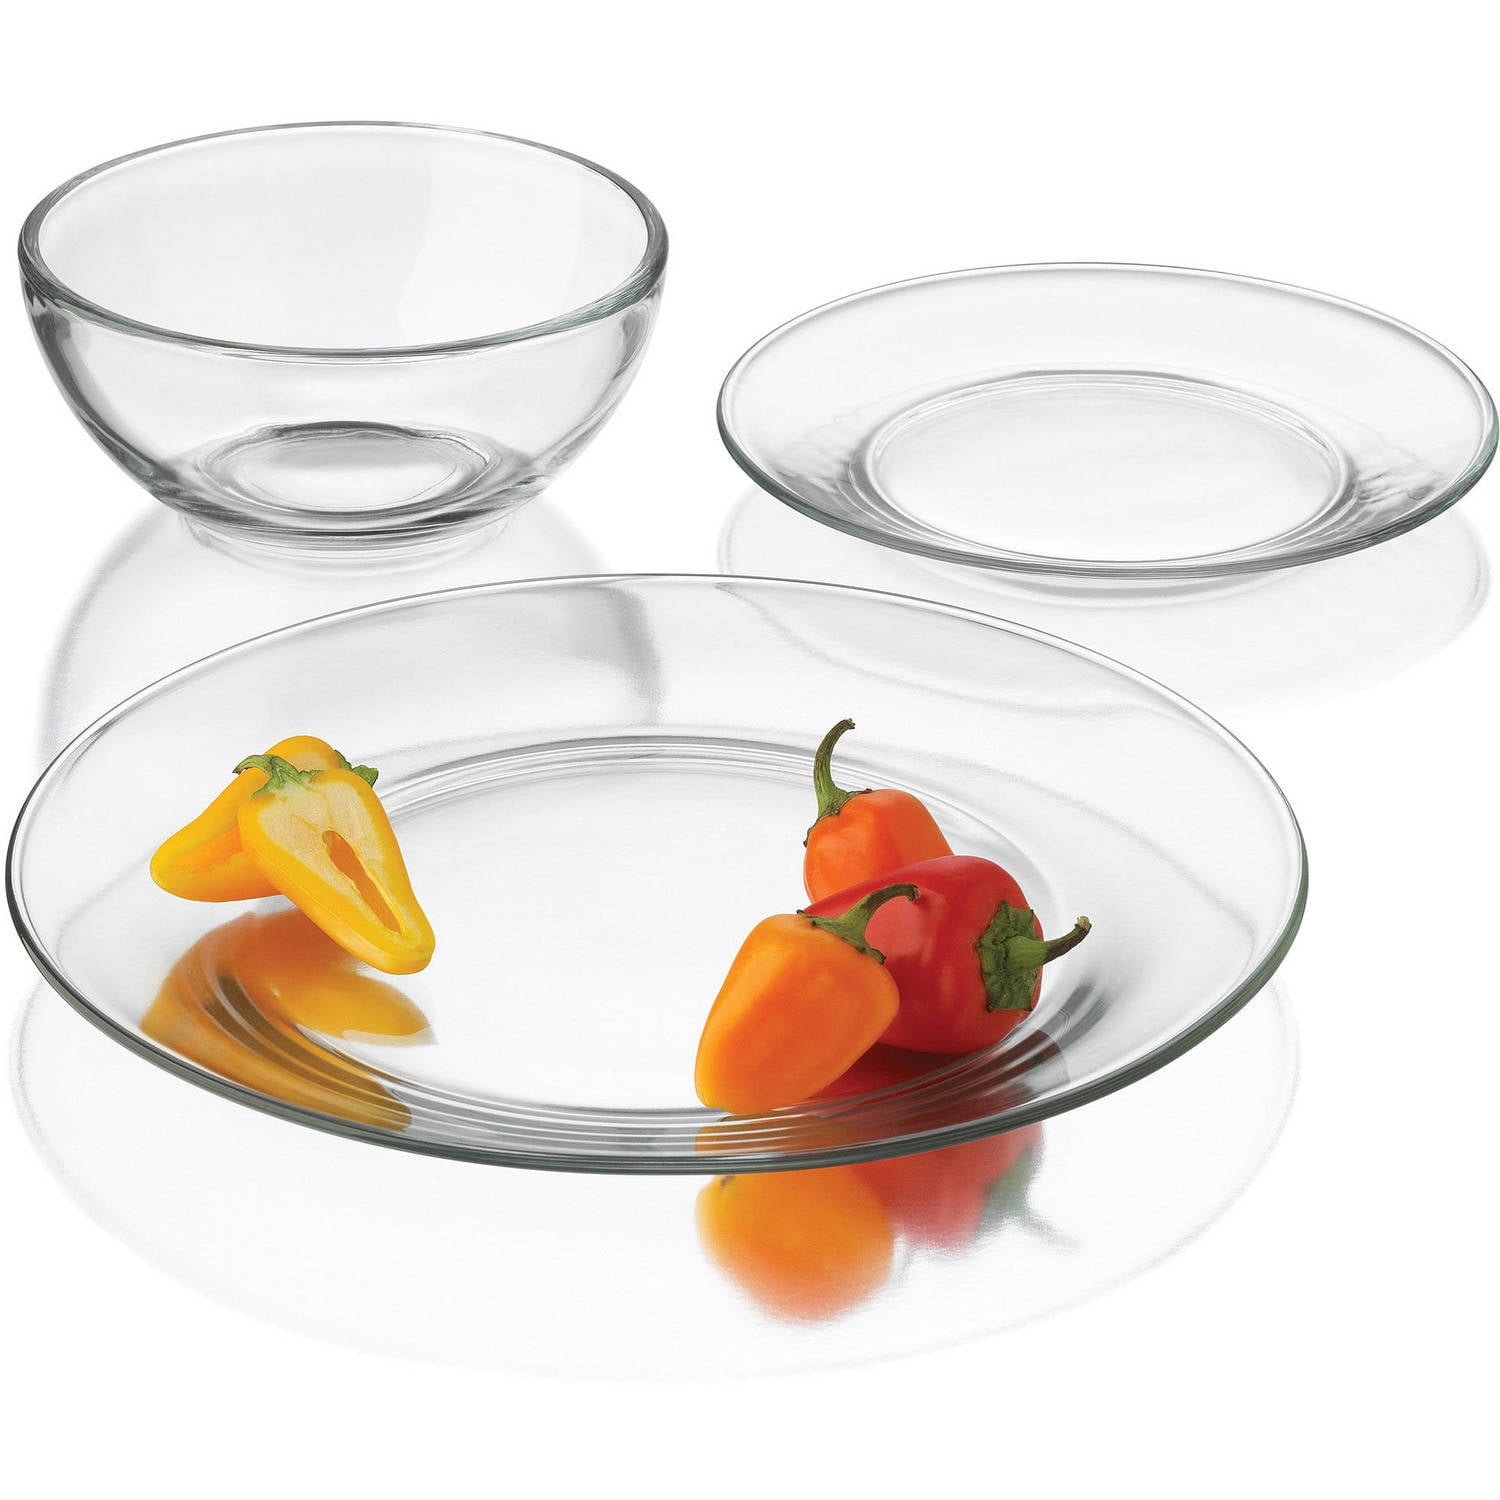 Libbey Crisa Tempo Square Dinner Plate Box of 12 Clear 10-Inch